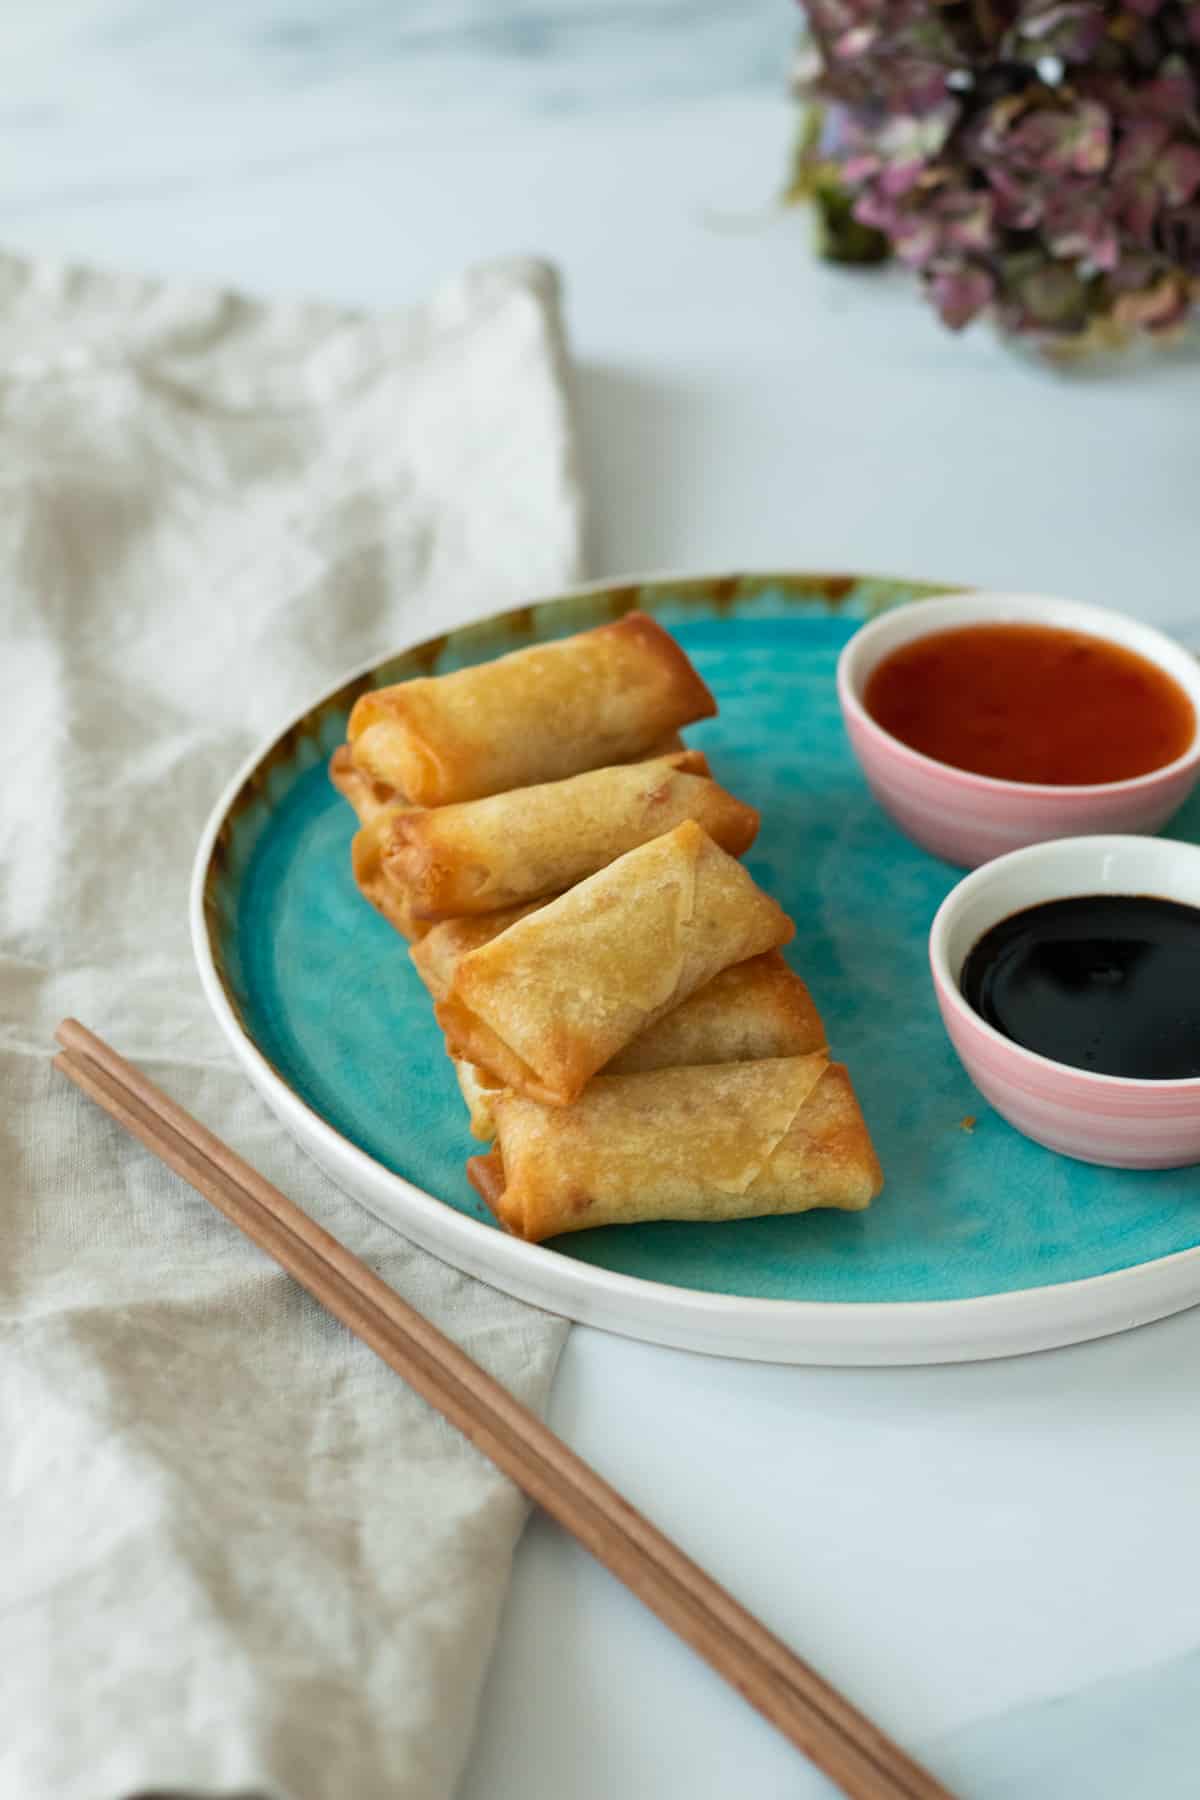 air fryer spring rolls on a blue plate next to two sauces